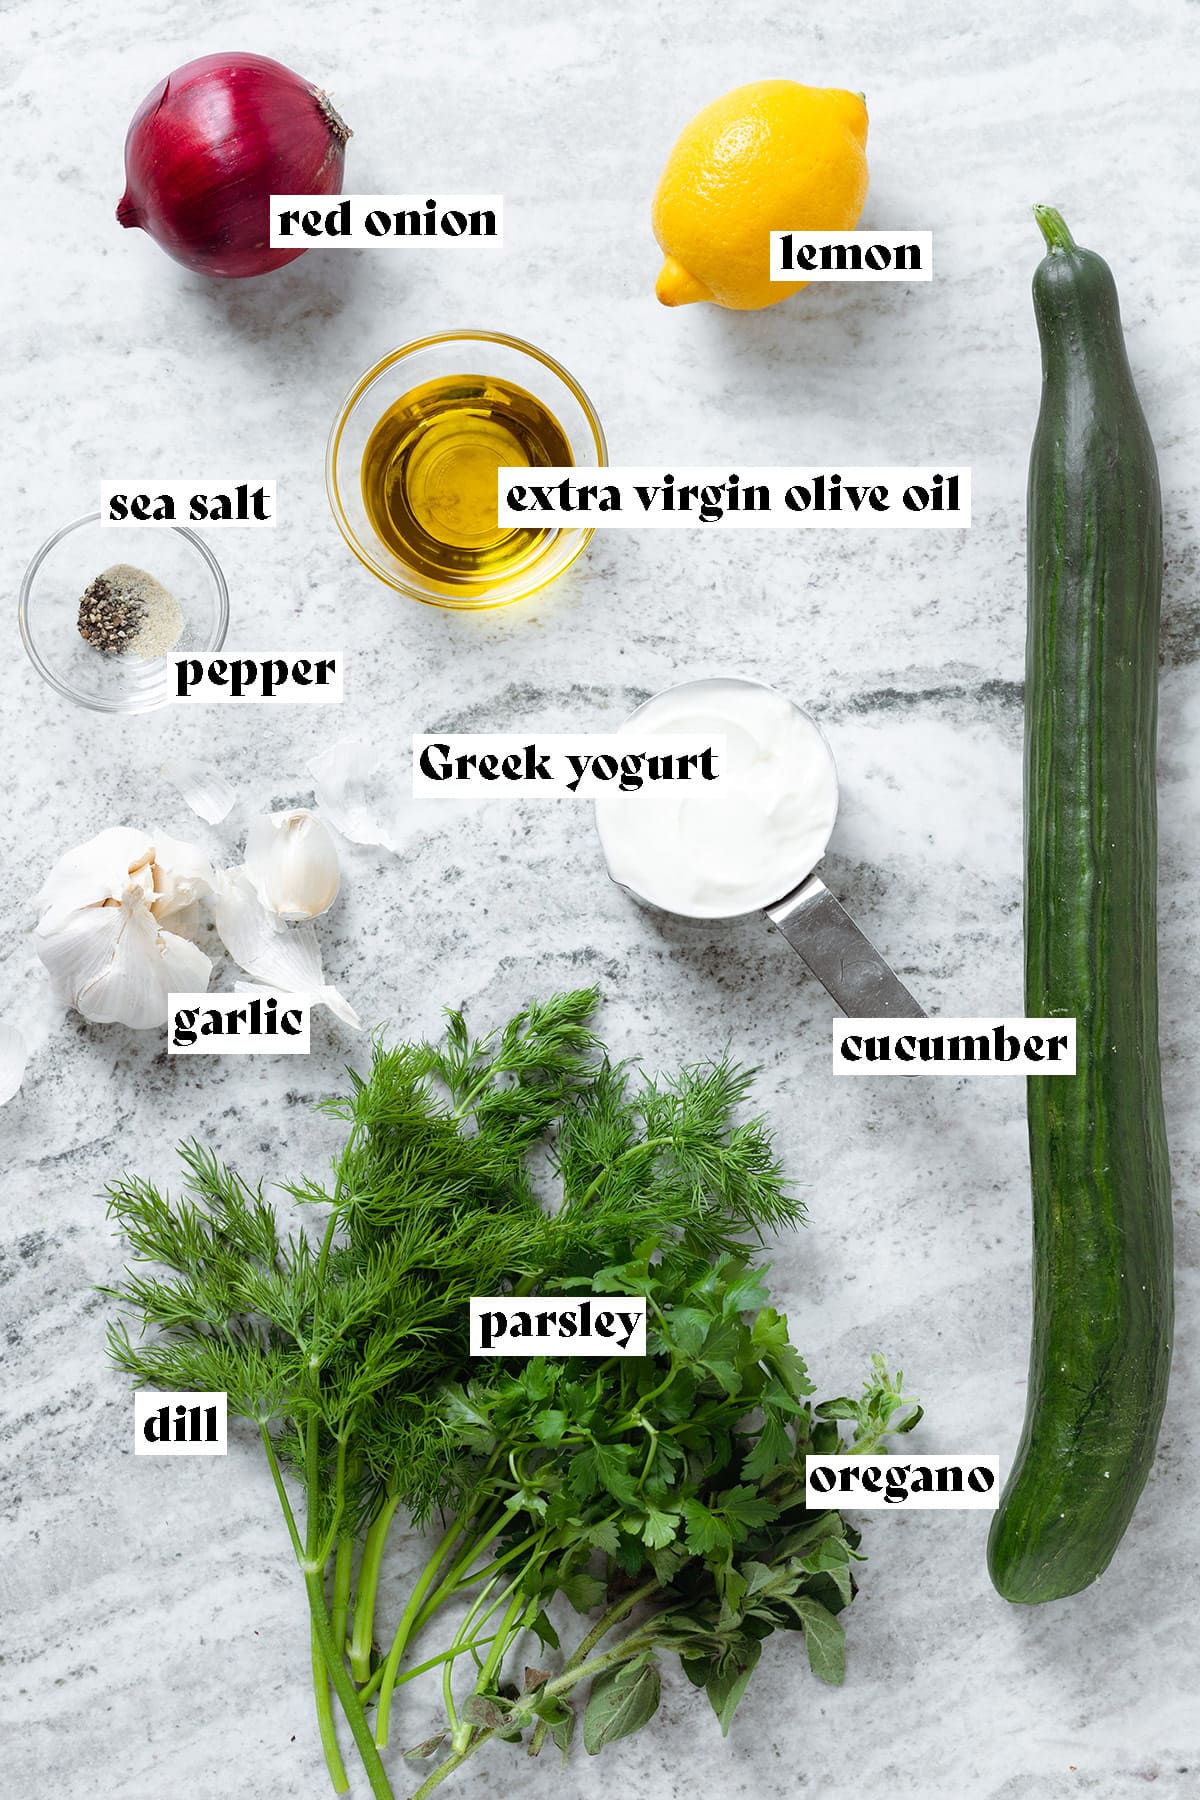 Ingredients like cucumber, fresh herbs, and lemon laid out on a white stone backdrop.